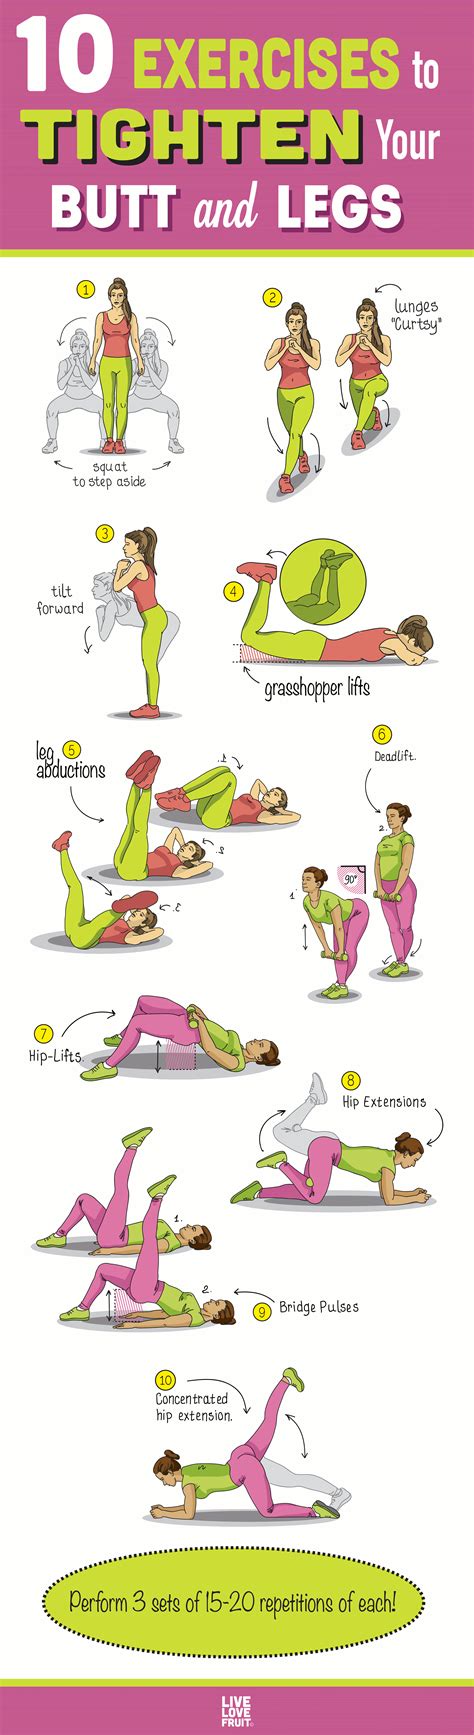 10 Exercises To Tighten Your Butt And Legs One Week Plan Exercise